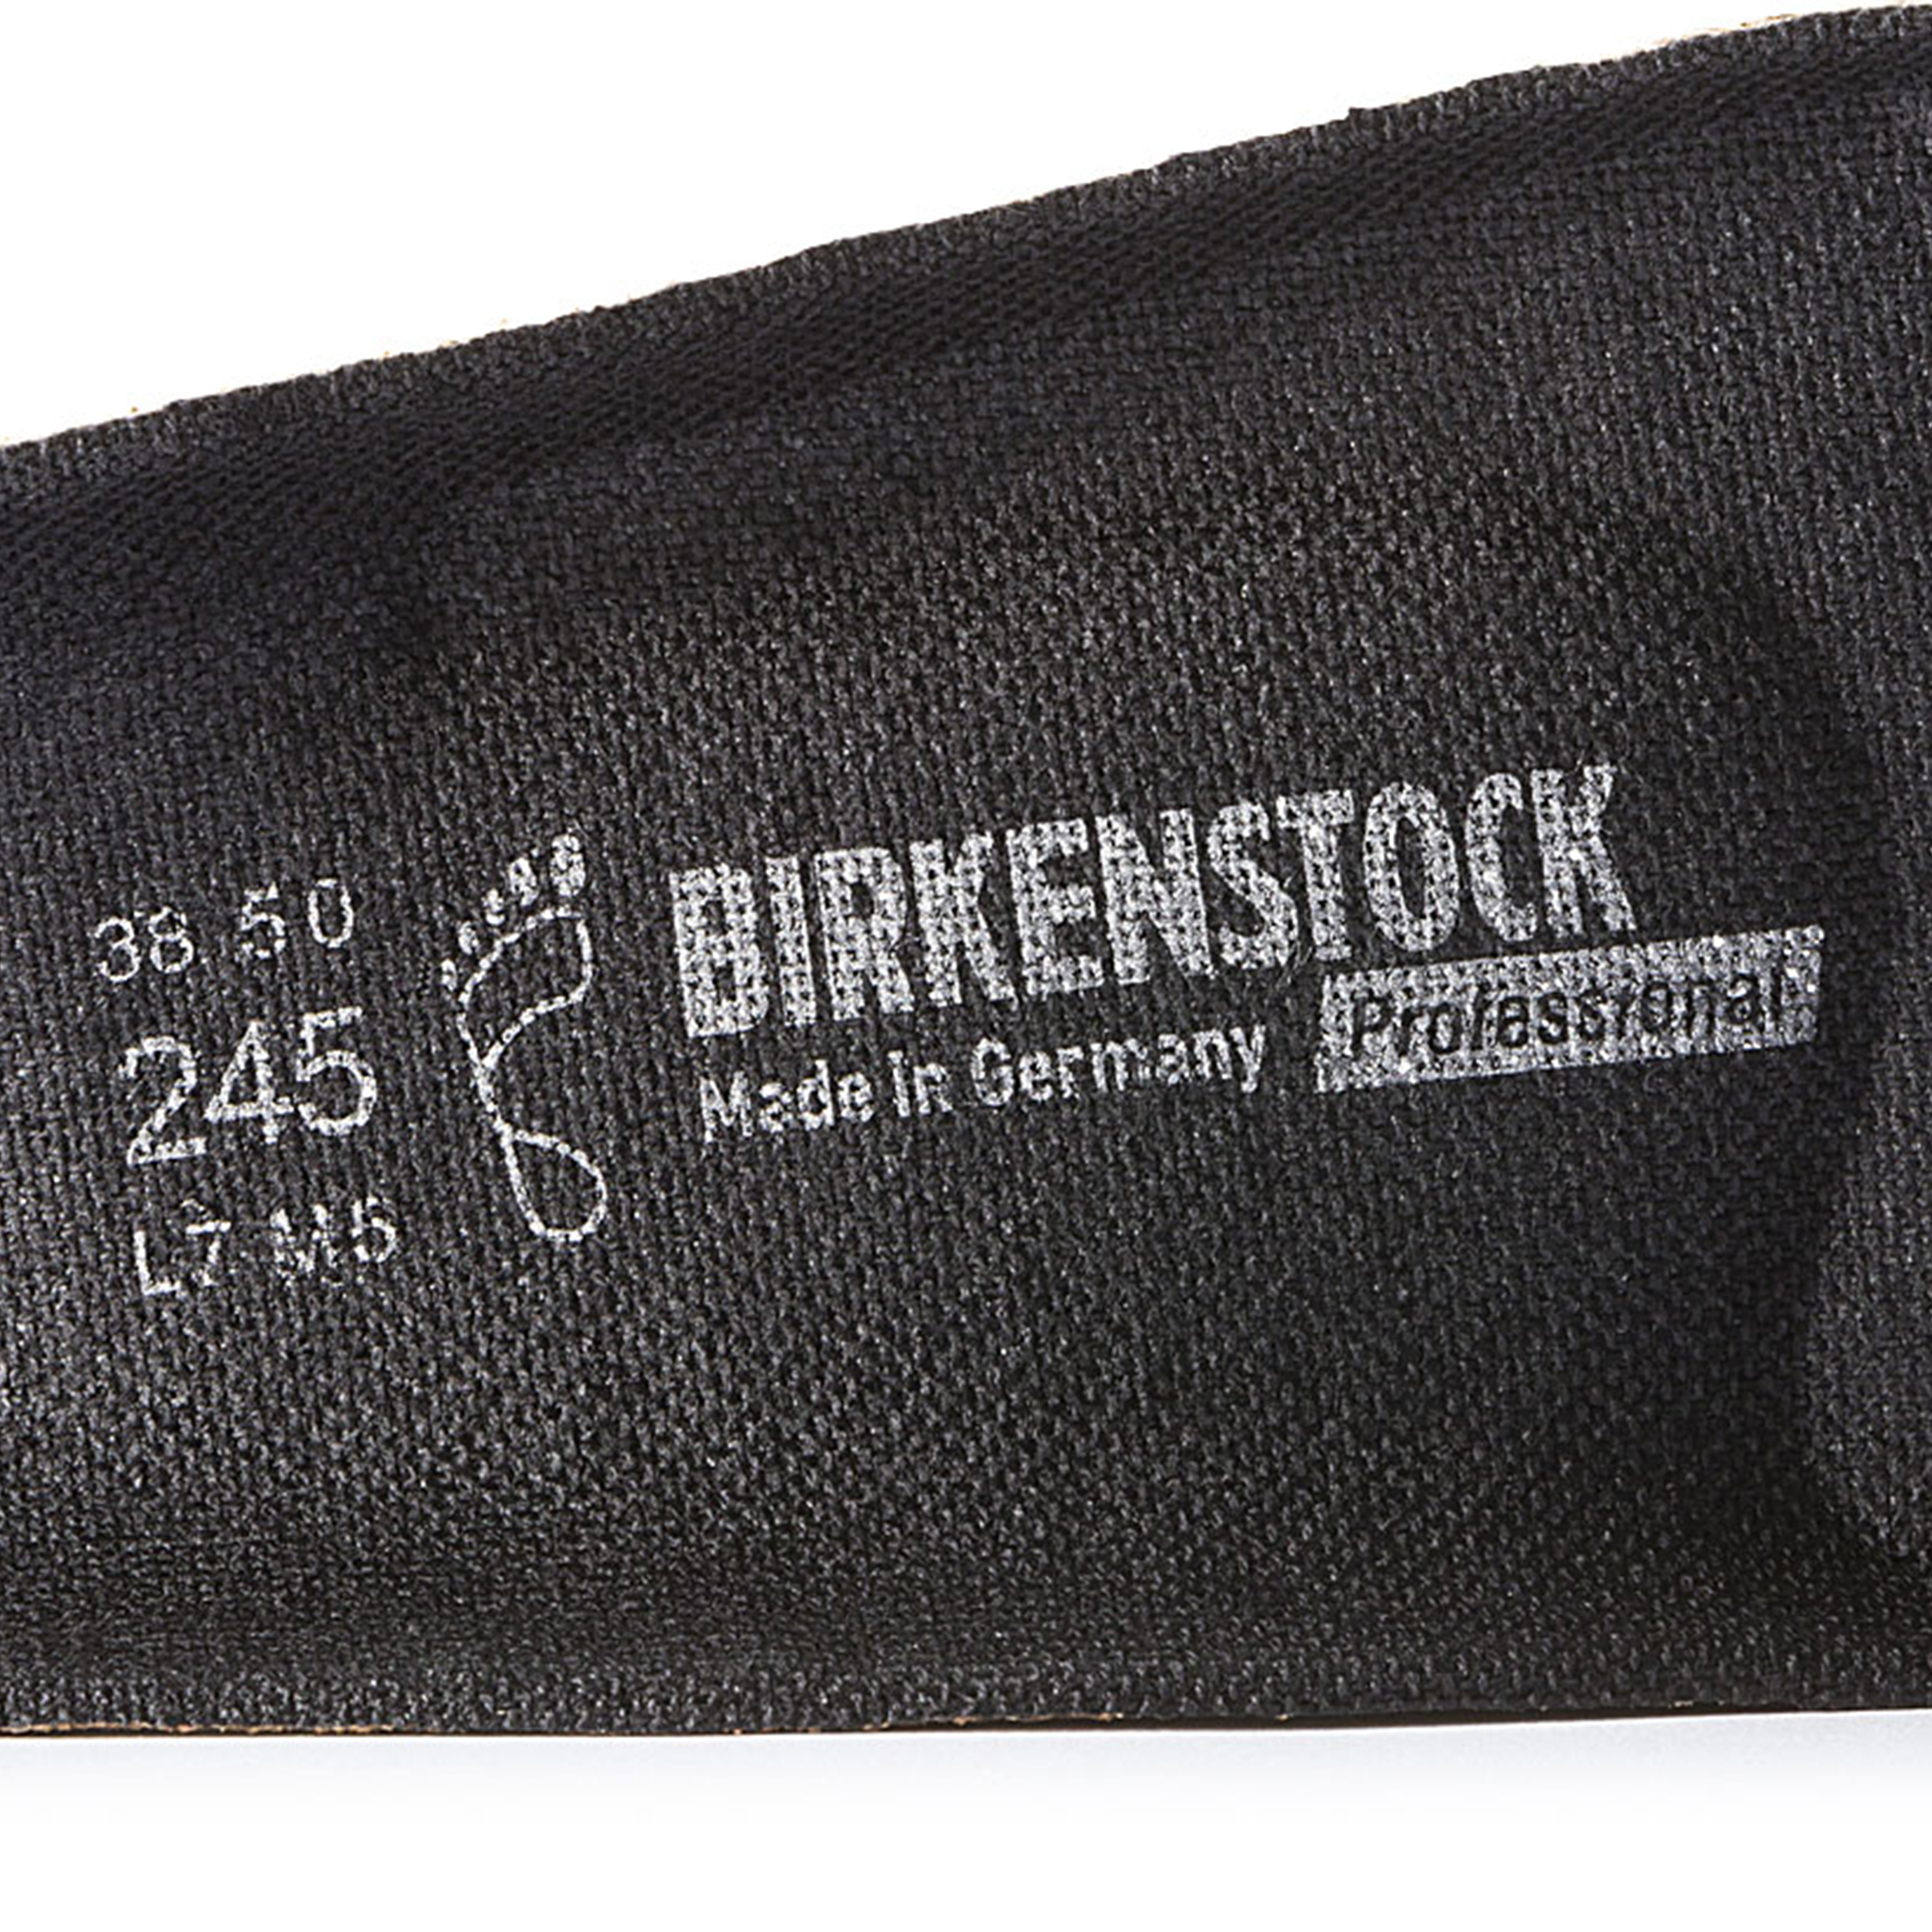 birki replacement footbed